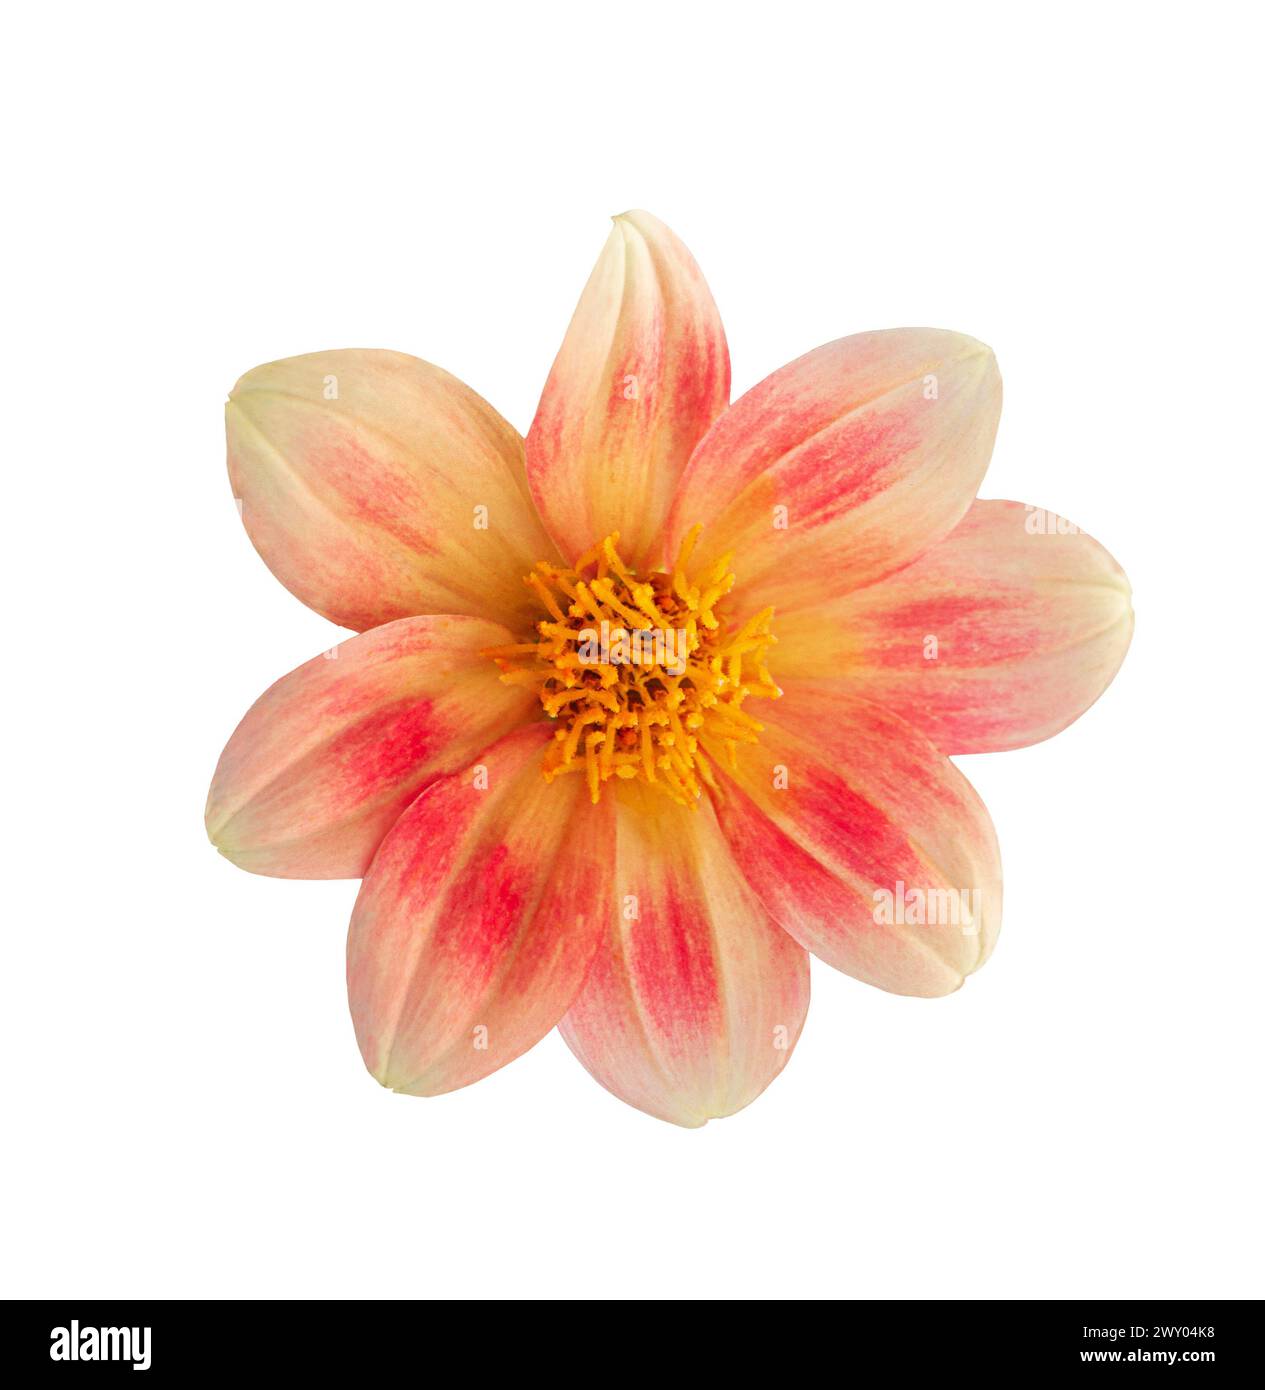 White and pink Dahlia flower 'Jolly Fellows' close-up on white isolated background Stock Photo